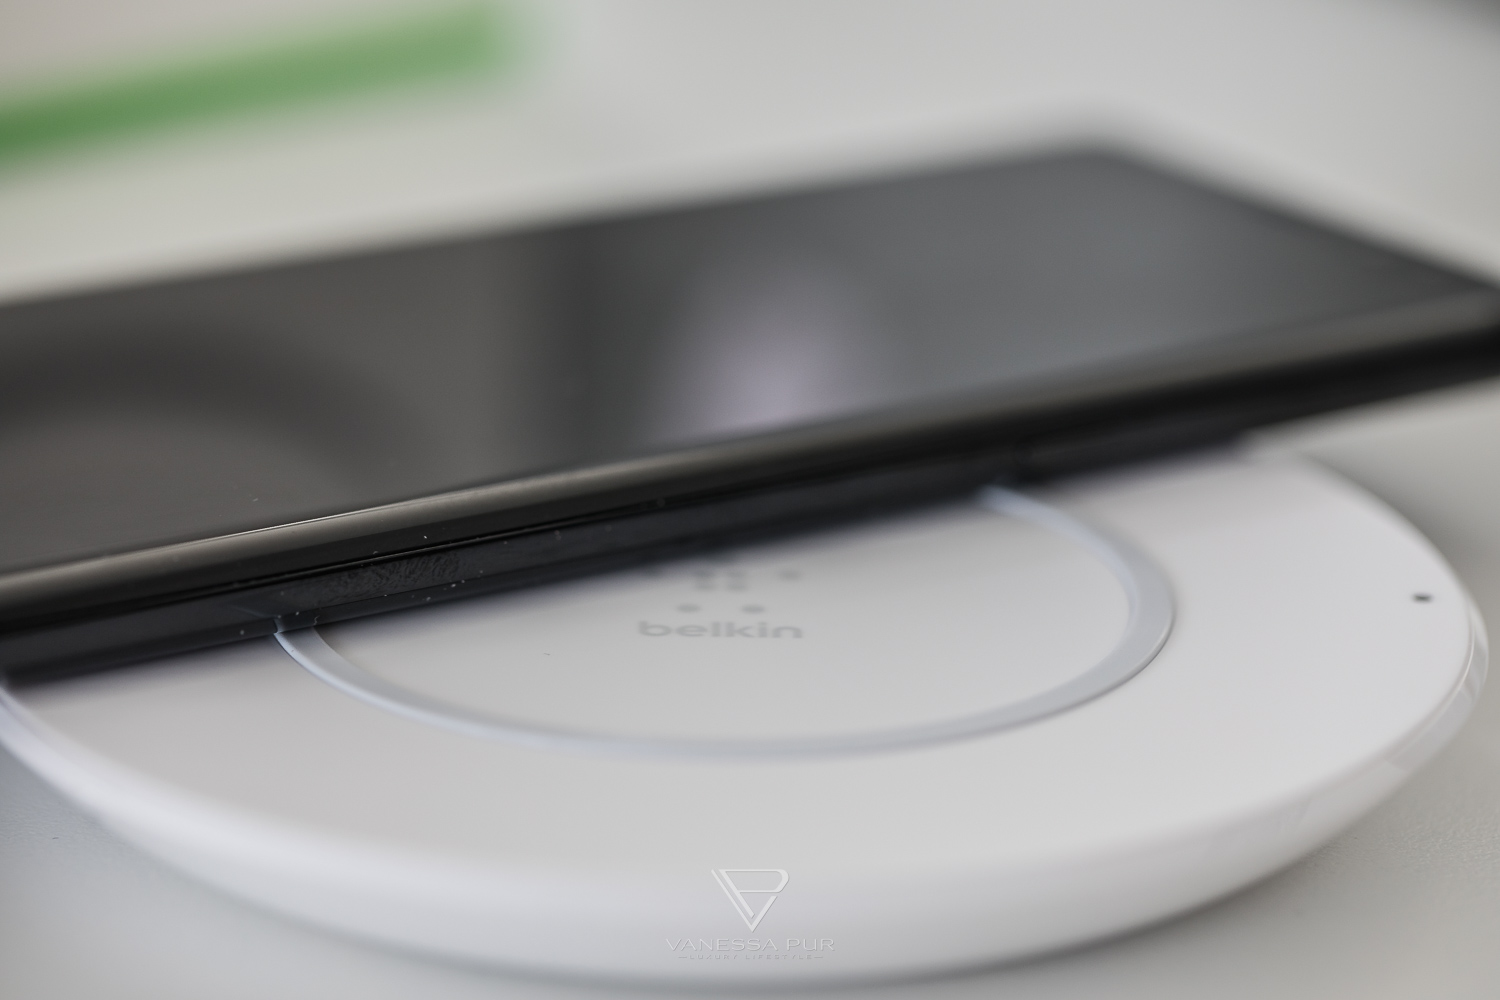 Belkin Boost Up Wireless Charging Station for iPhones in review - Qi Charger - Technology blog - Smartphone blogger - Lifestyle blog - Product test - Rating